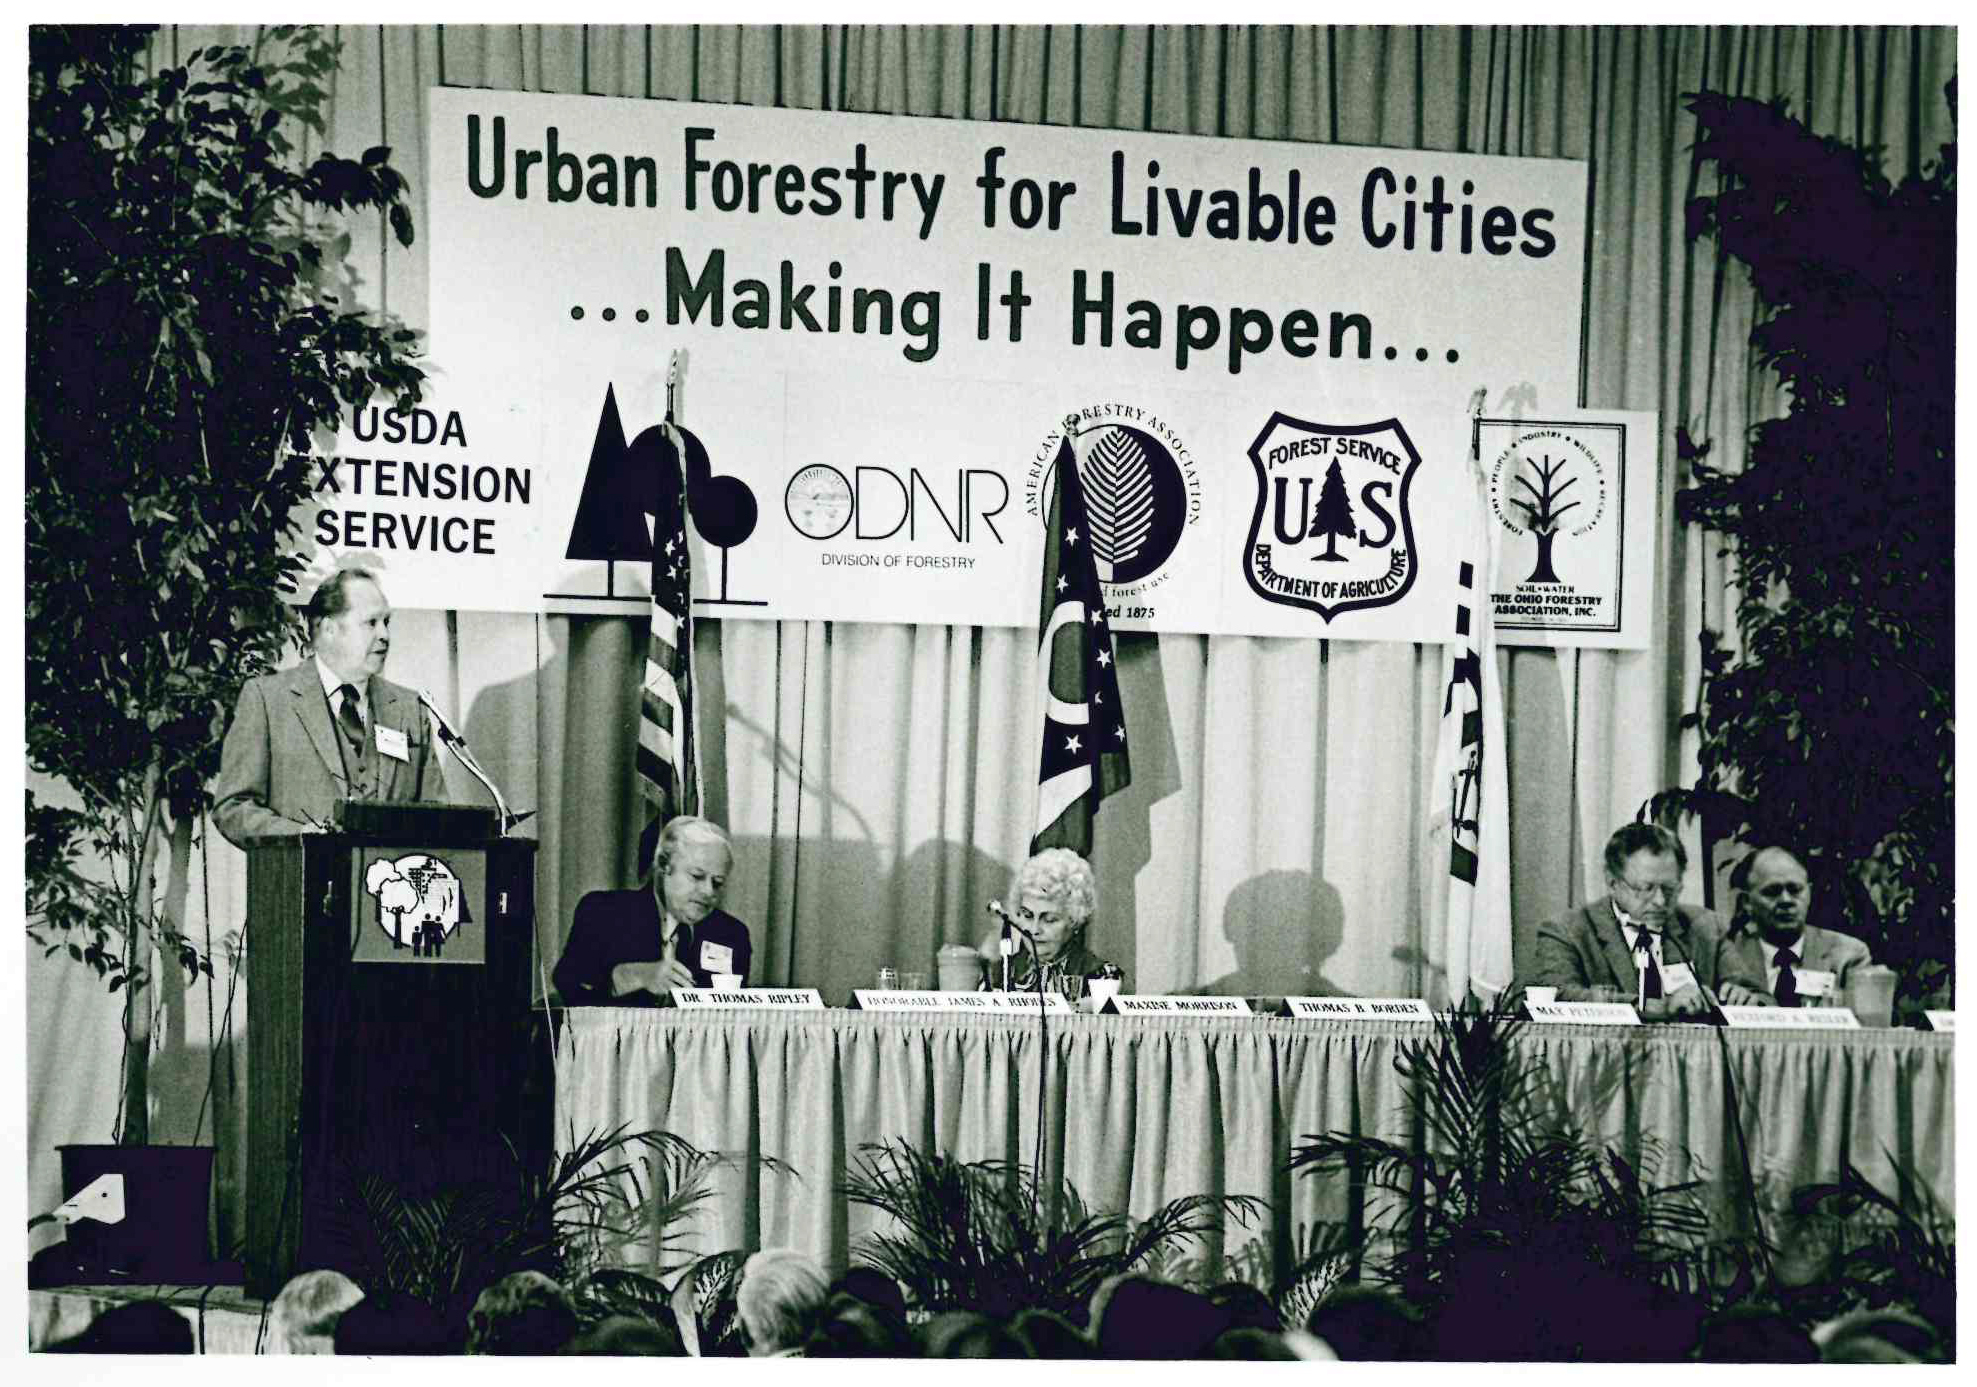 : In 1978, American Forests helped establish the urban forestry concept, rapidly becoming a catalyst for urban forestry. We were instrumental in establishing the National Urban and Community Forestry Leaders Council in 1981, later to be called the National Urban Forest Council. This is a photo of the proceedings of the second national urban forestry conference in 1982.